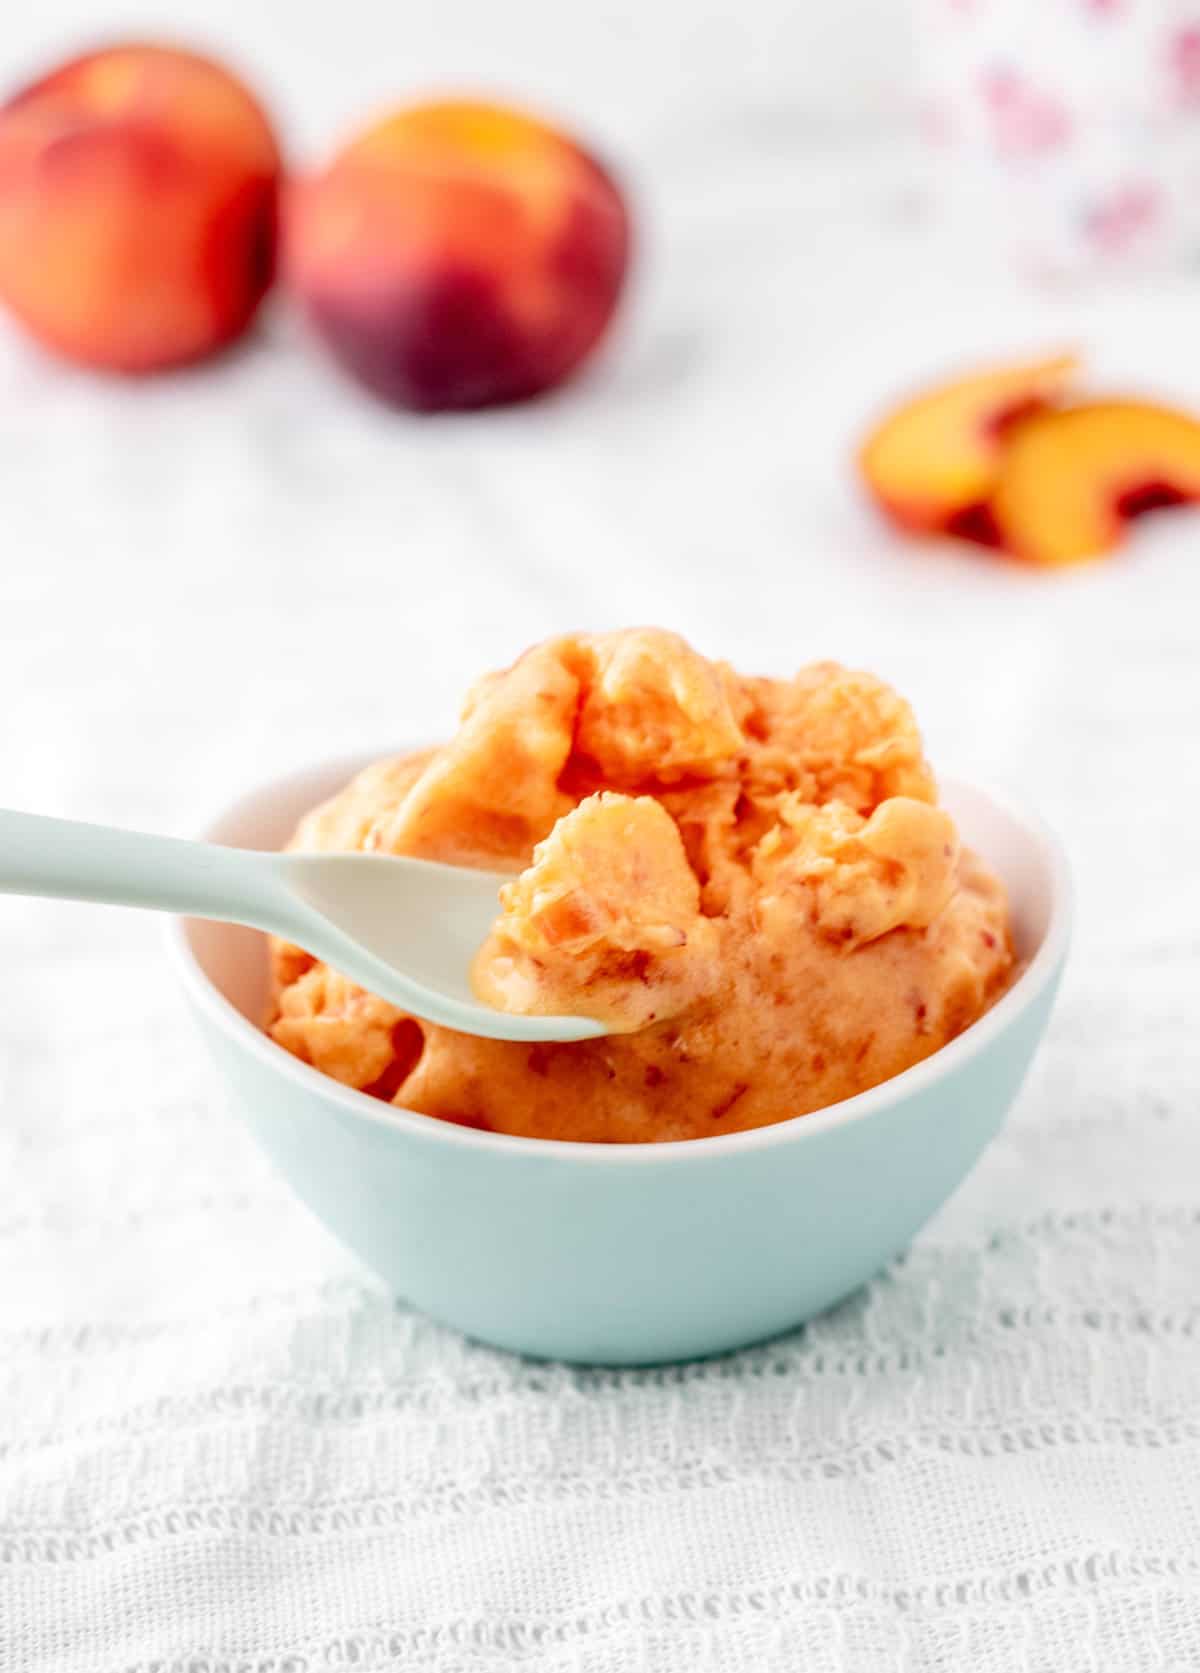 A spoon scooping up some homemade peach sorbet.